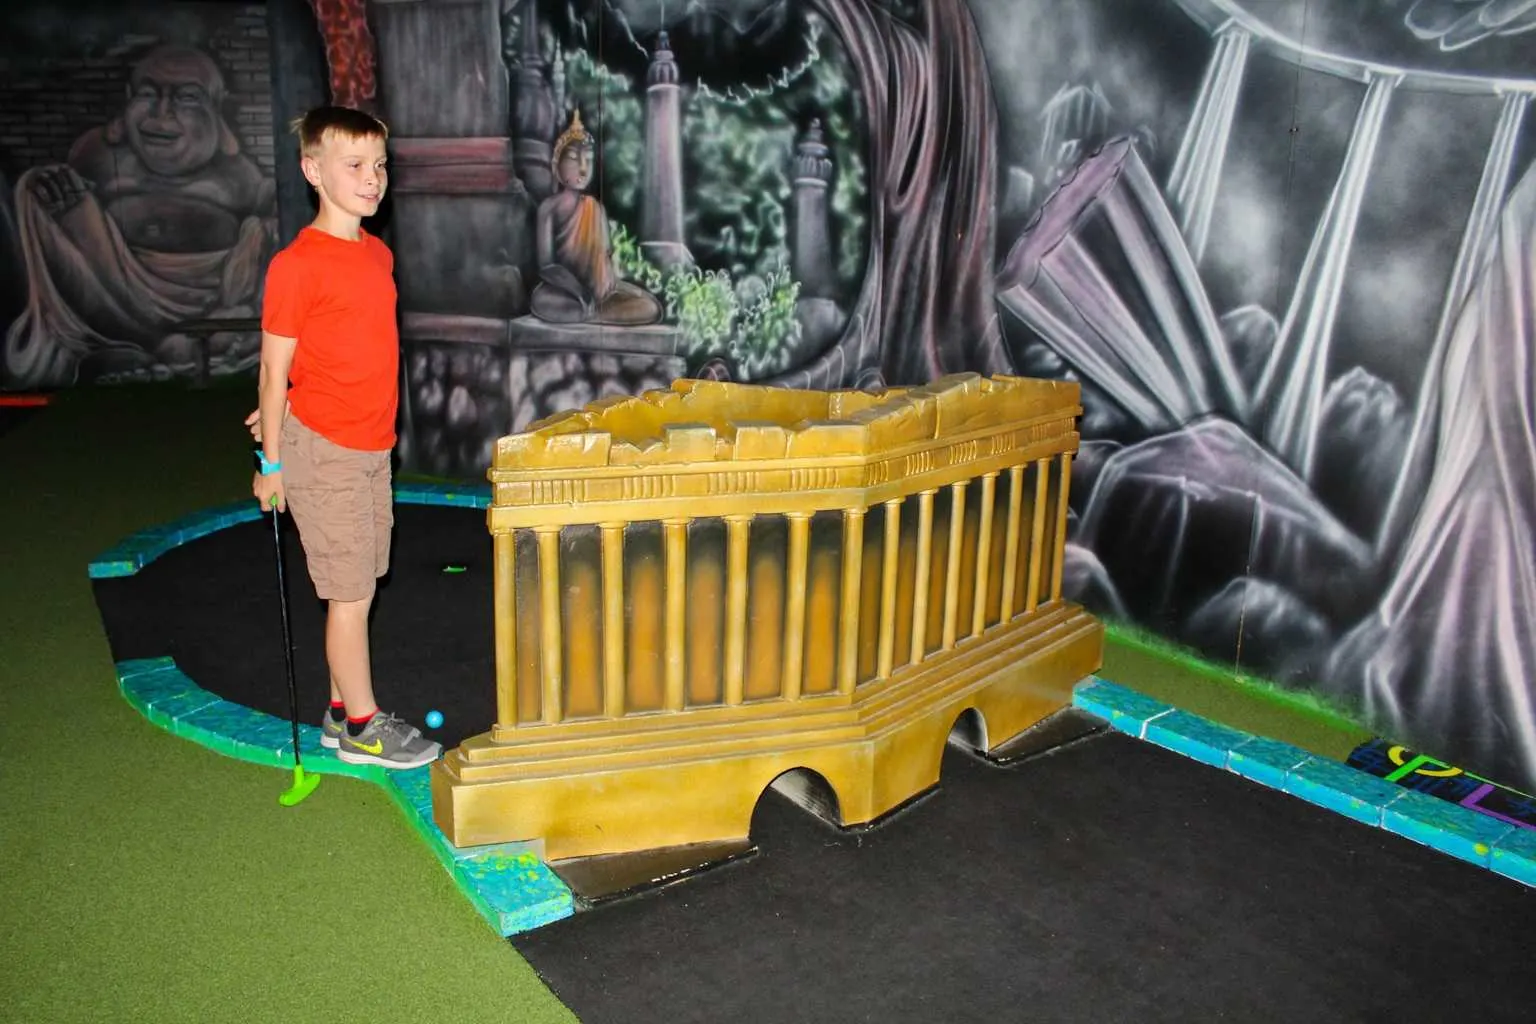 Get ready to experience miniature golf like never before! Glo Mini Golf in Riverside is a state of the art, indoor, glow in the dark mini golf course. The facility features hundreds of black lights that illuminate the course in a kaleidoscope colors! Travel the world with our 27 ‘World Wonder’ themed holes. Go from the Great Pyramids of Egypt to the Running of the Bulls in Spain to Niagara Falls in New York all lit up by colorful glow in the dark paint.